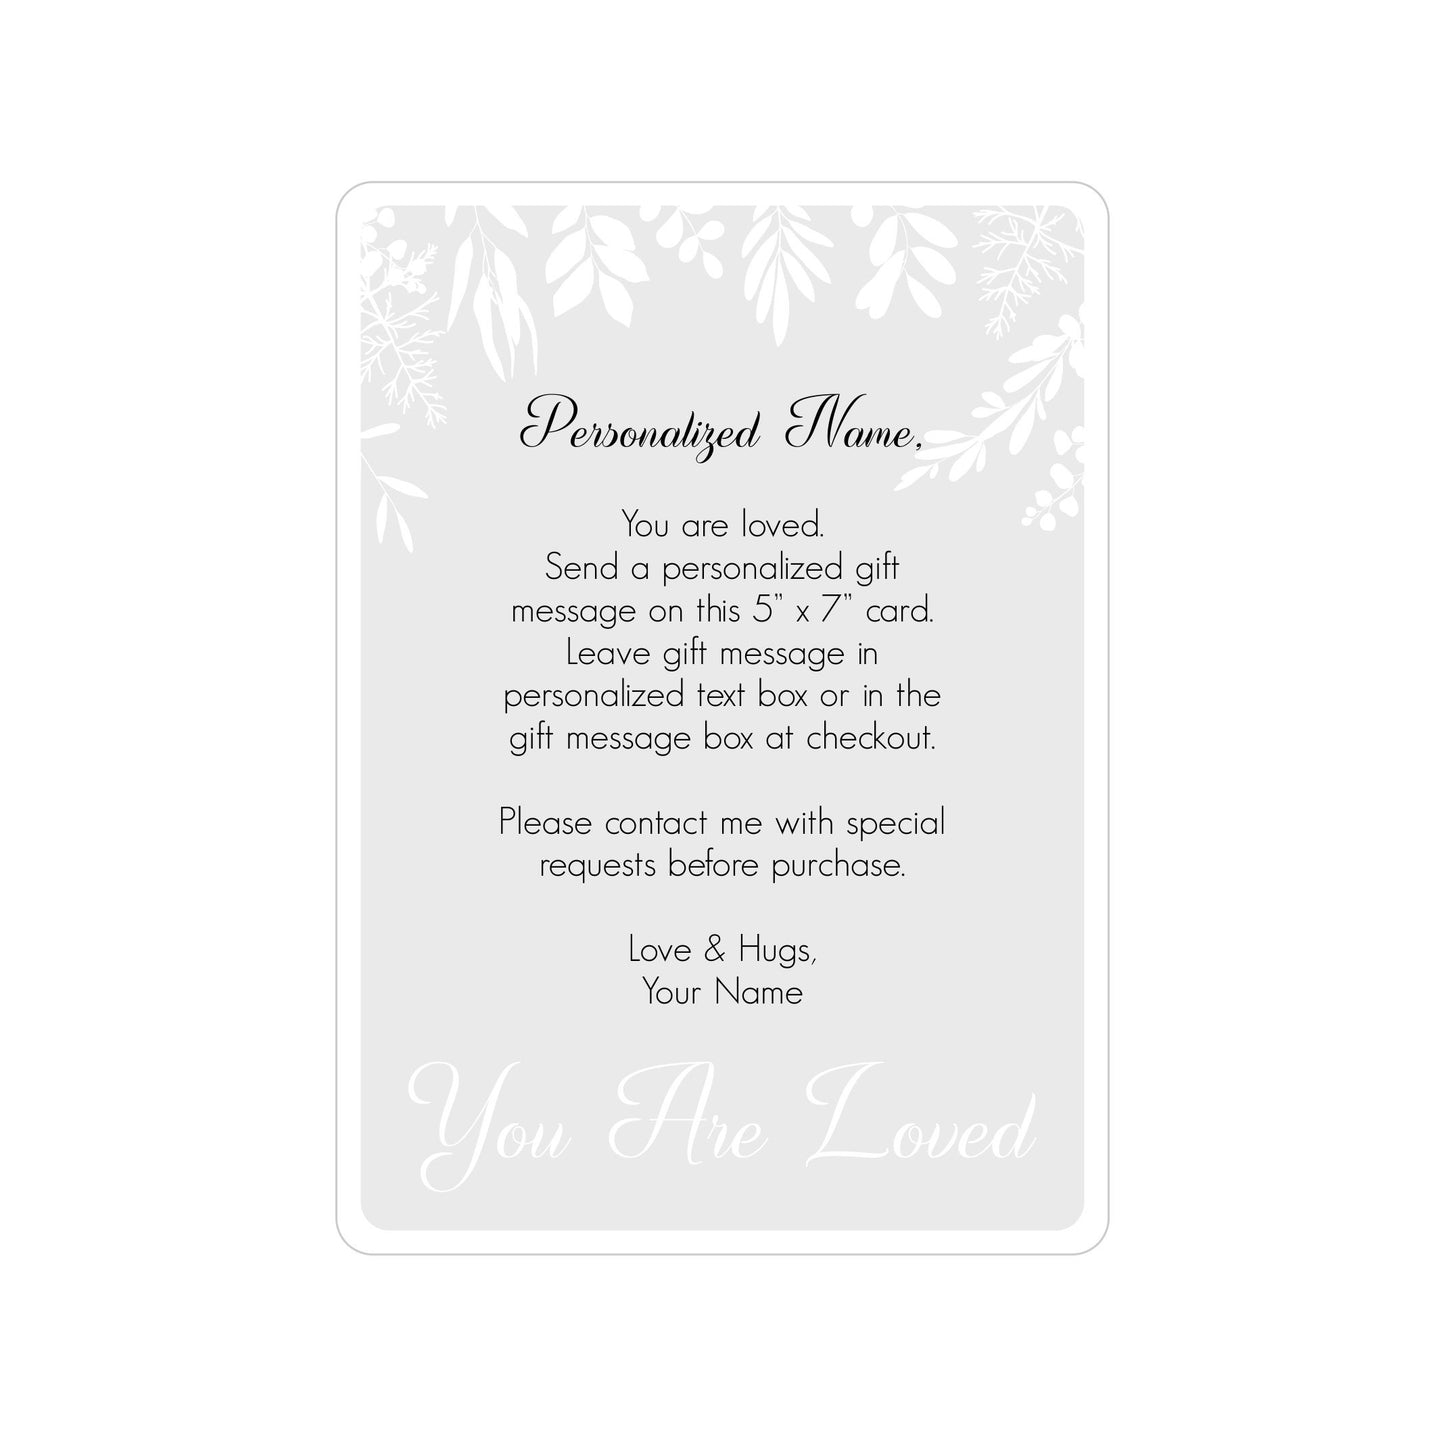 Thinking of You Love & Encouragement Christian Gift Box